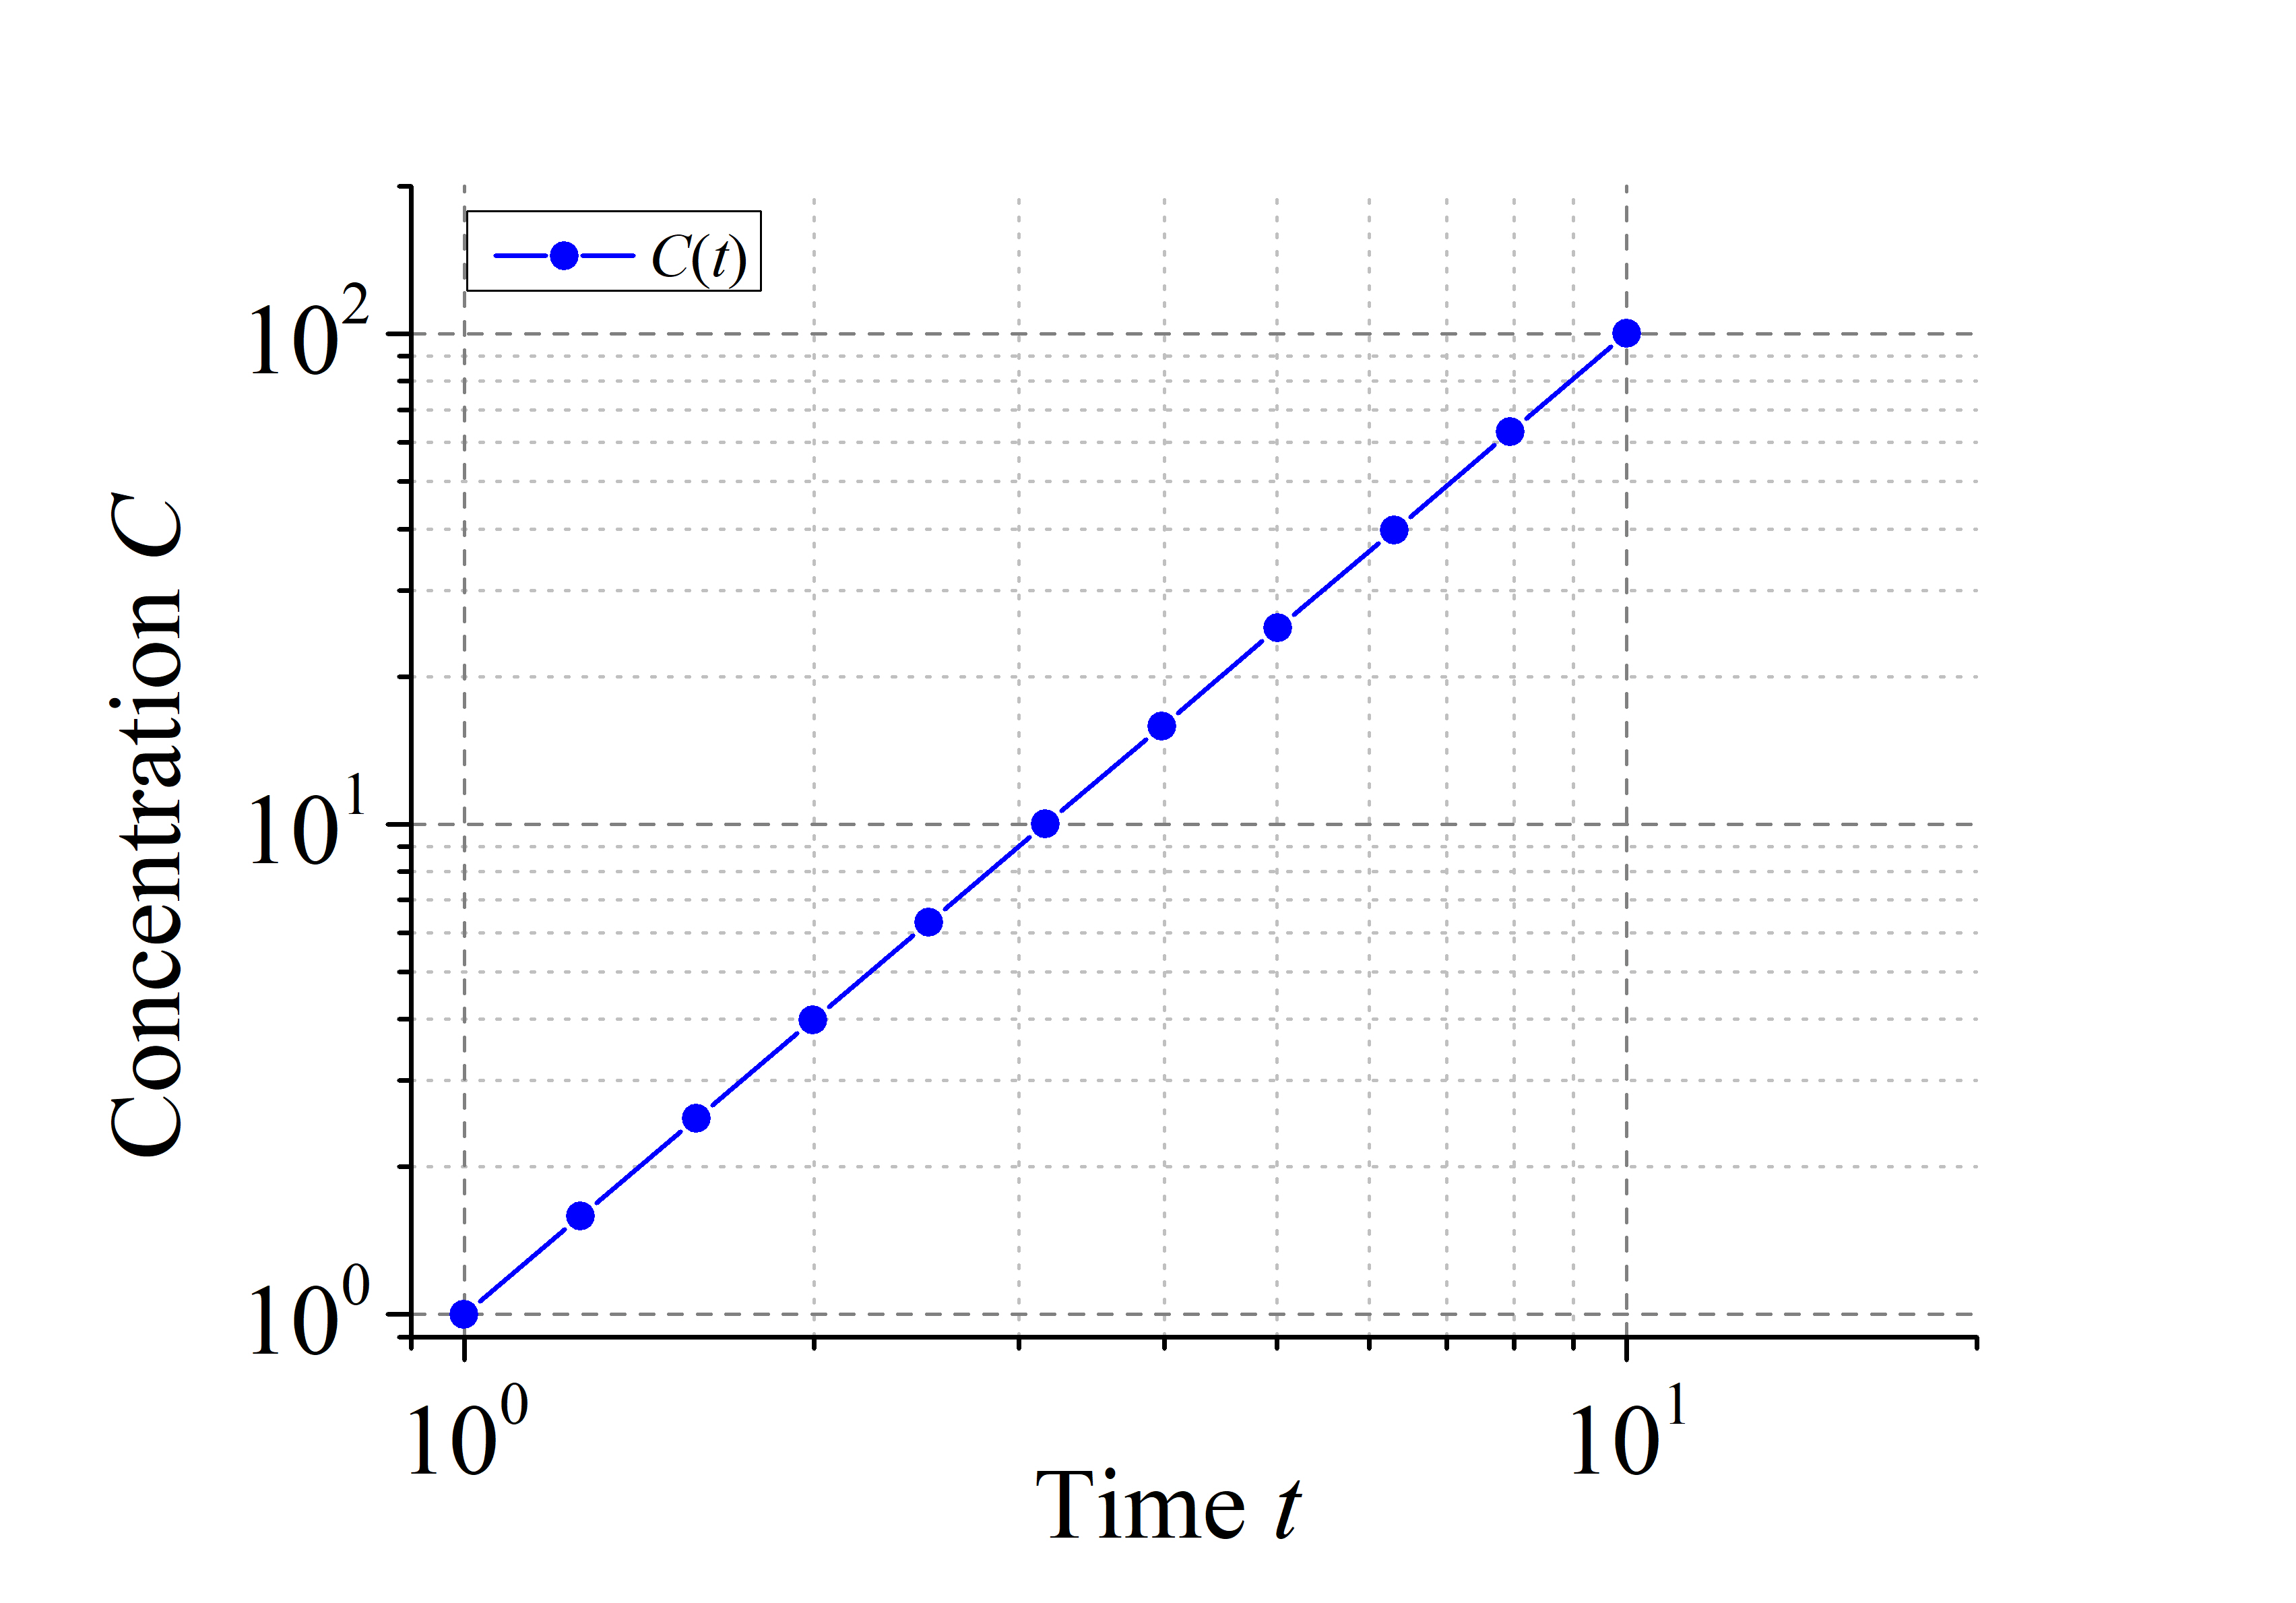 Figure 2: Concentration (C) as a function of time (t) with logarithmic scaling applied to both axes